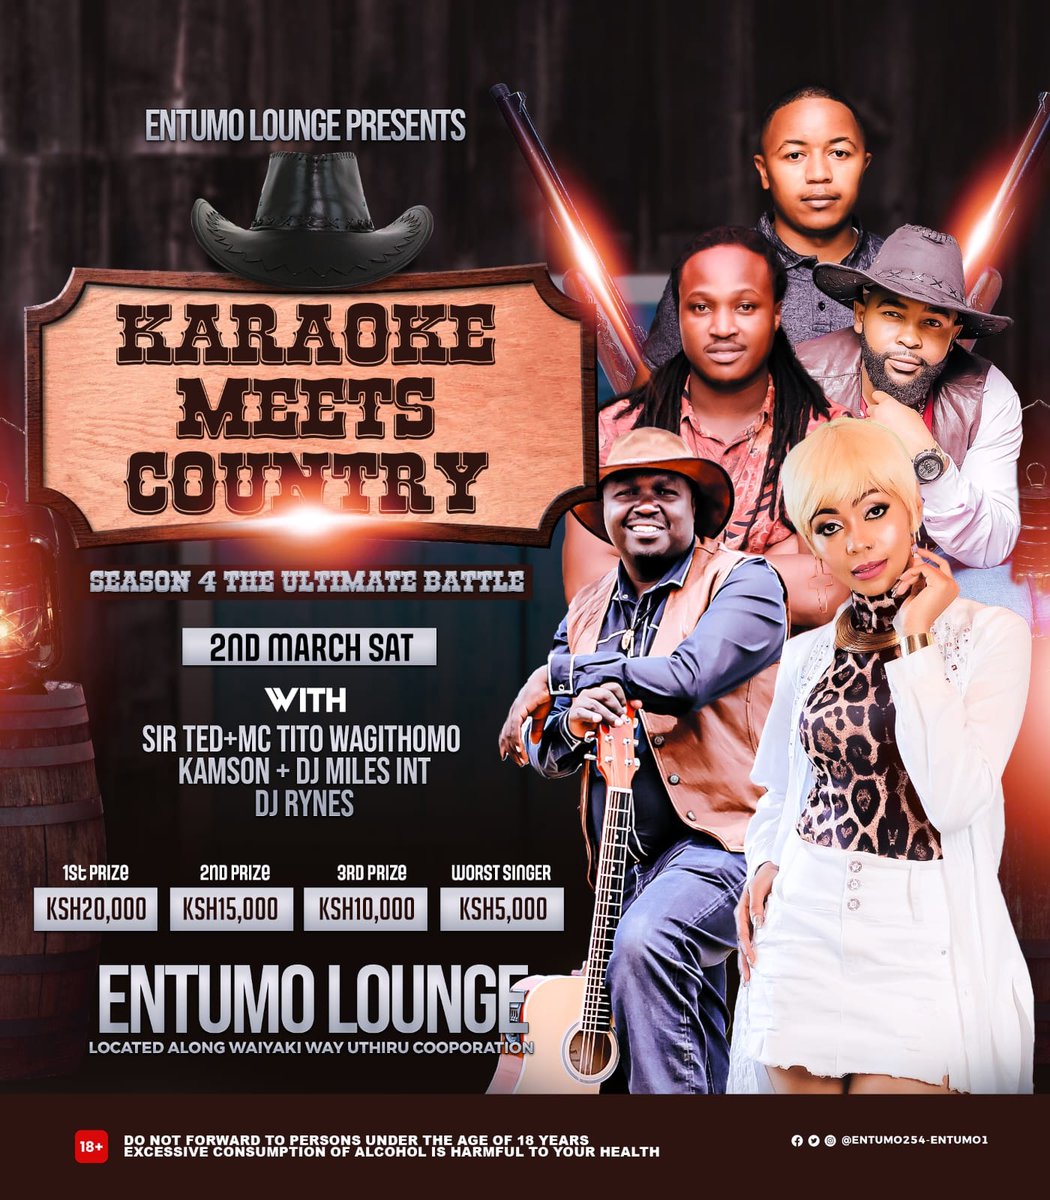 We will be making moments matter this time around with an epic event💯 Invite all your friends and family and let us party. En-tumo Lounge ⏩Another Place......Another World⏪ #entumo254 #entumolounge #waiyakiwaysfinest #karaokemeetscountryseason4 #theultimatekaraokebattle